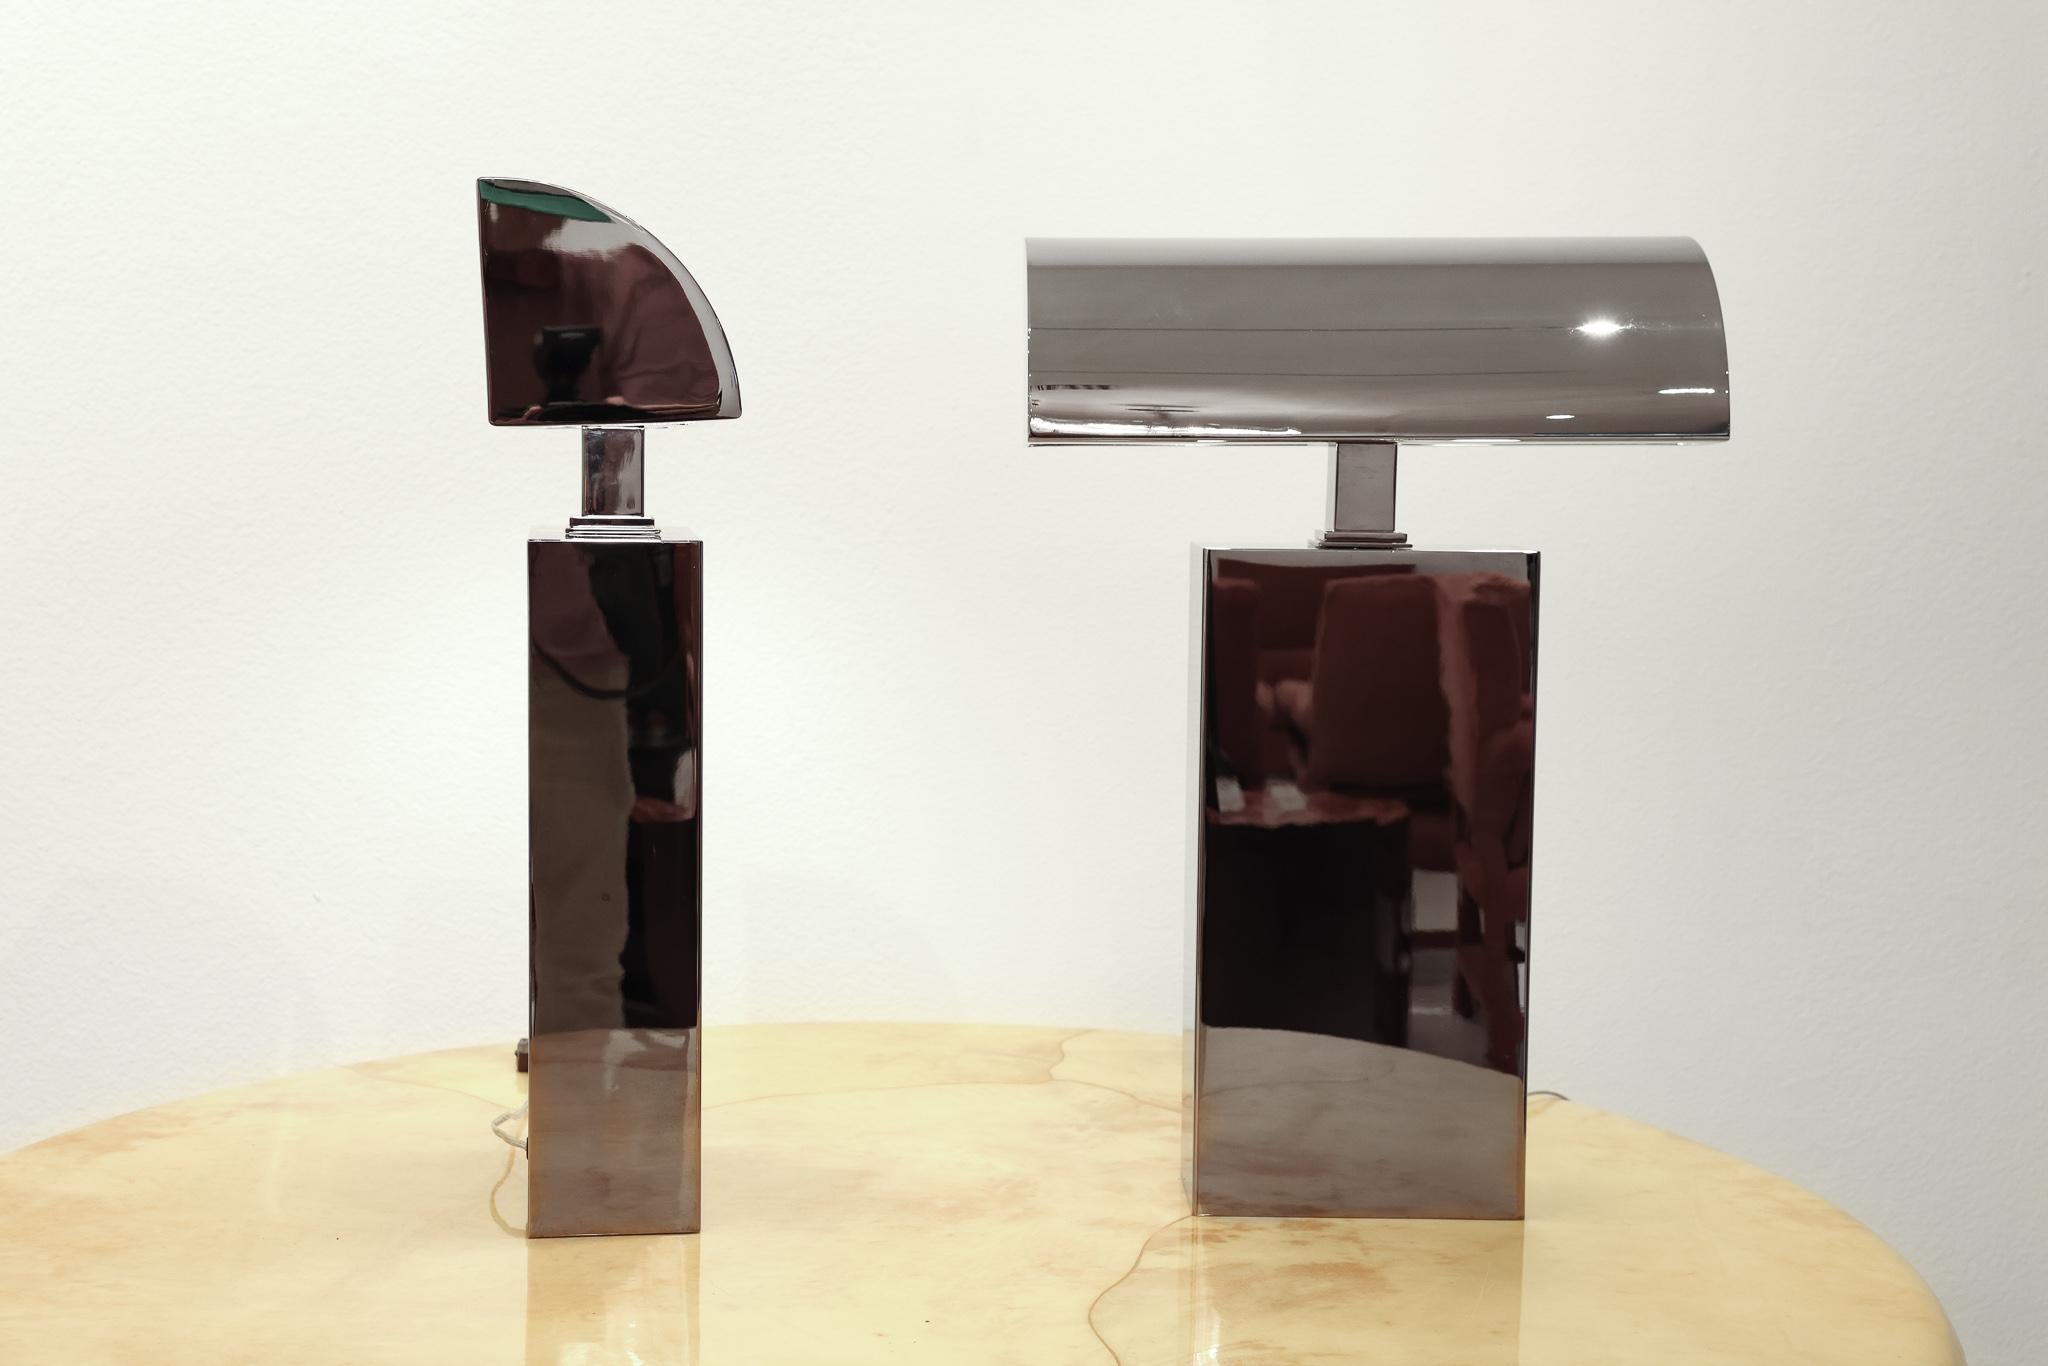 Anodized Pair of Signed Karl Springer Sculpture Lamps in a Gunmetal Finish